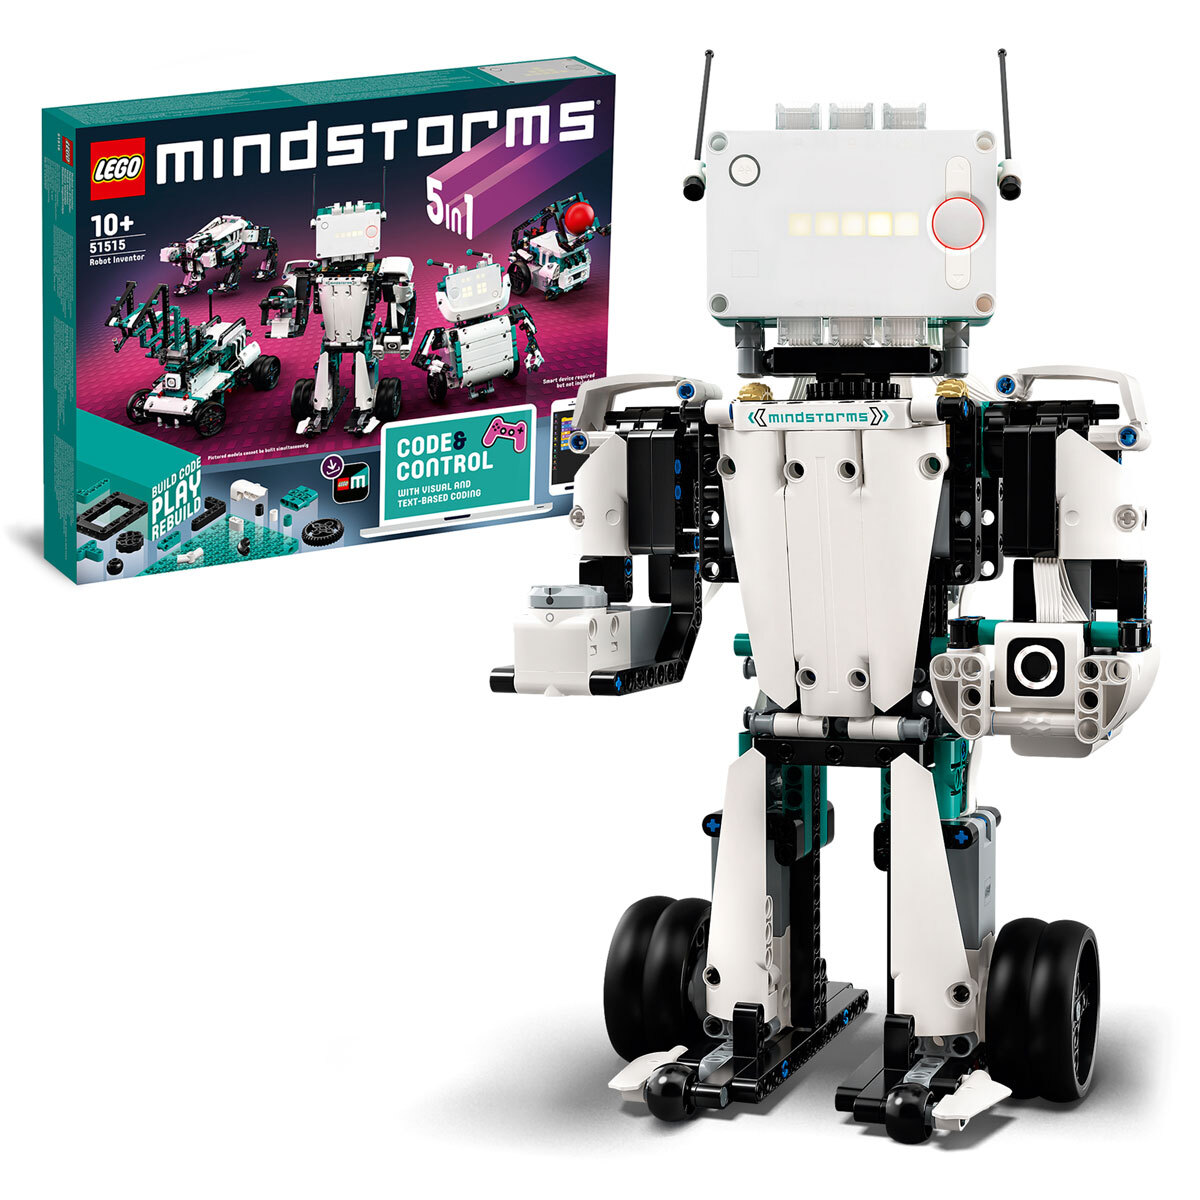 Lego mindstorms boxed image with kit